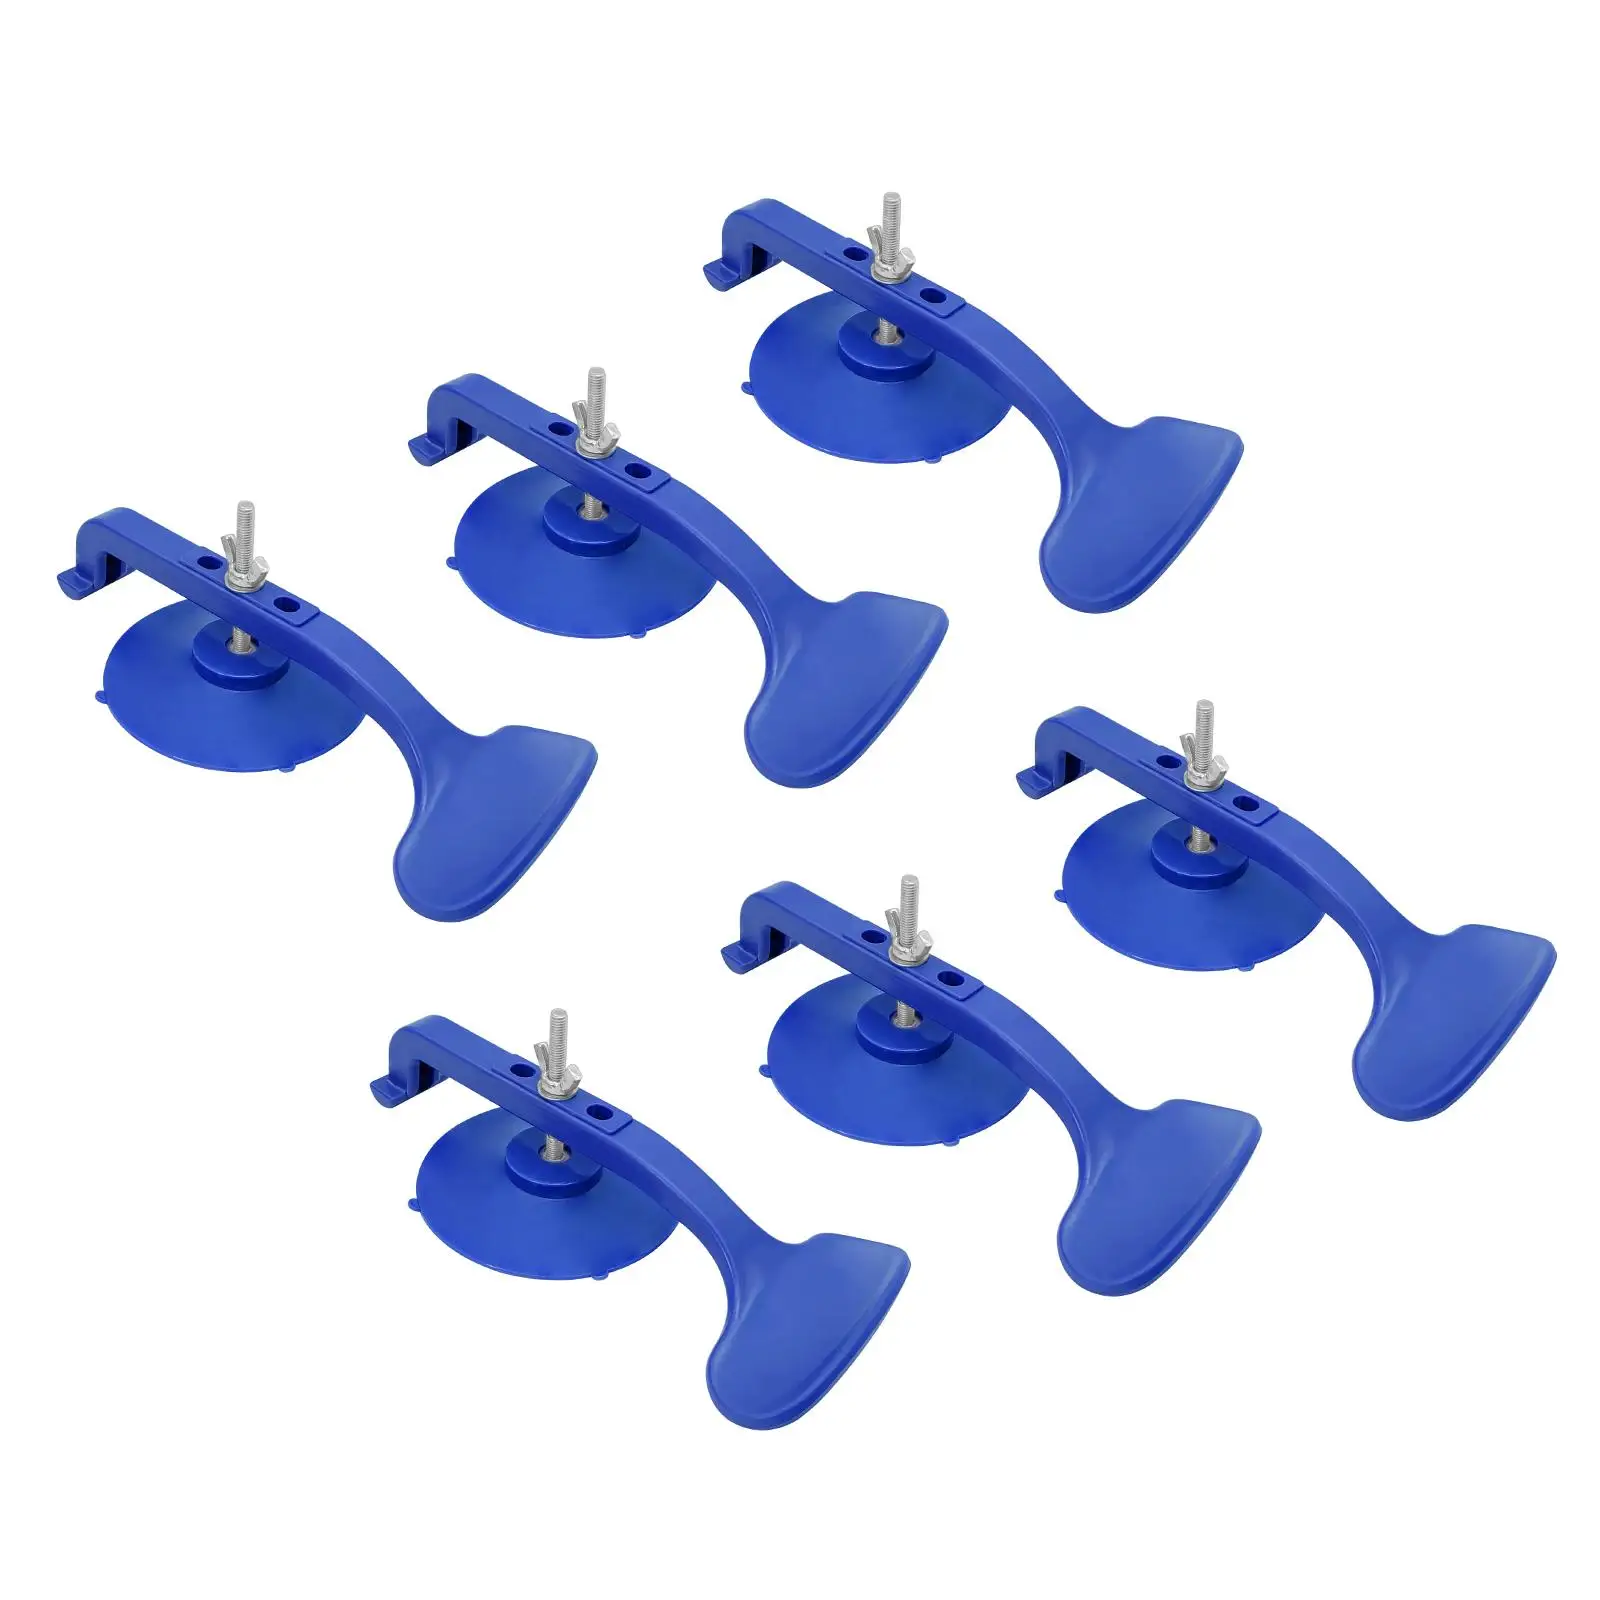 6x High Quality Suction Clamp Set Easy to Operate for Convertible Glass Windshield Repair